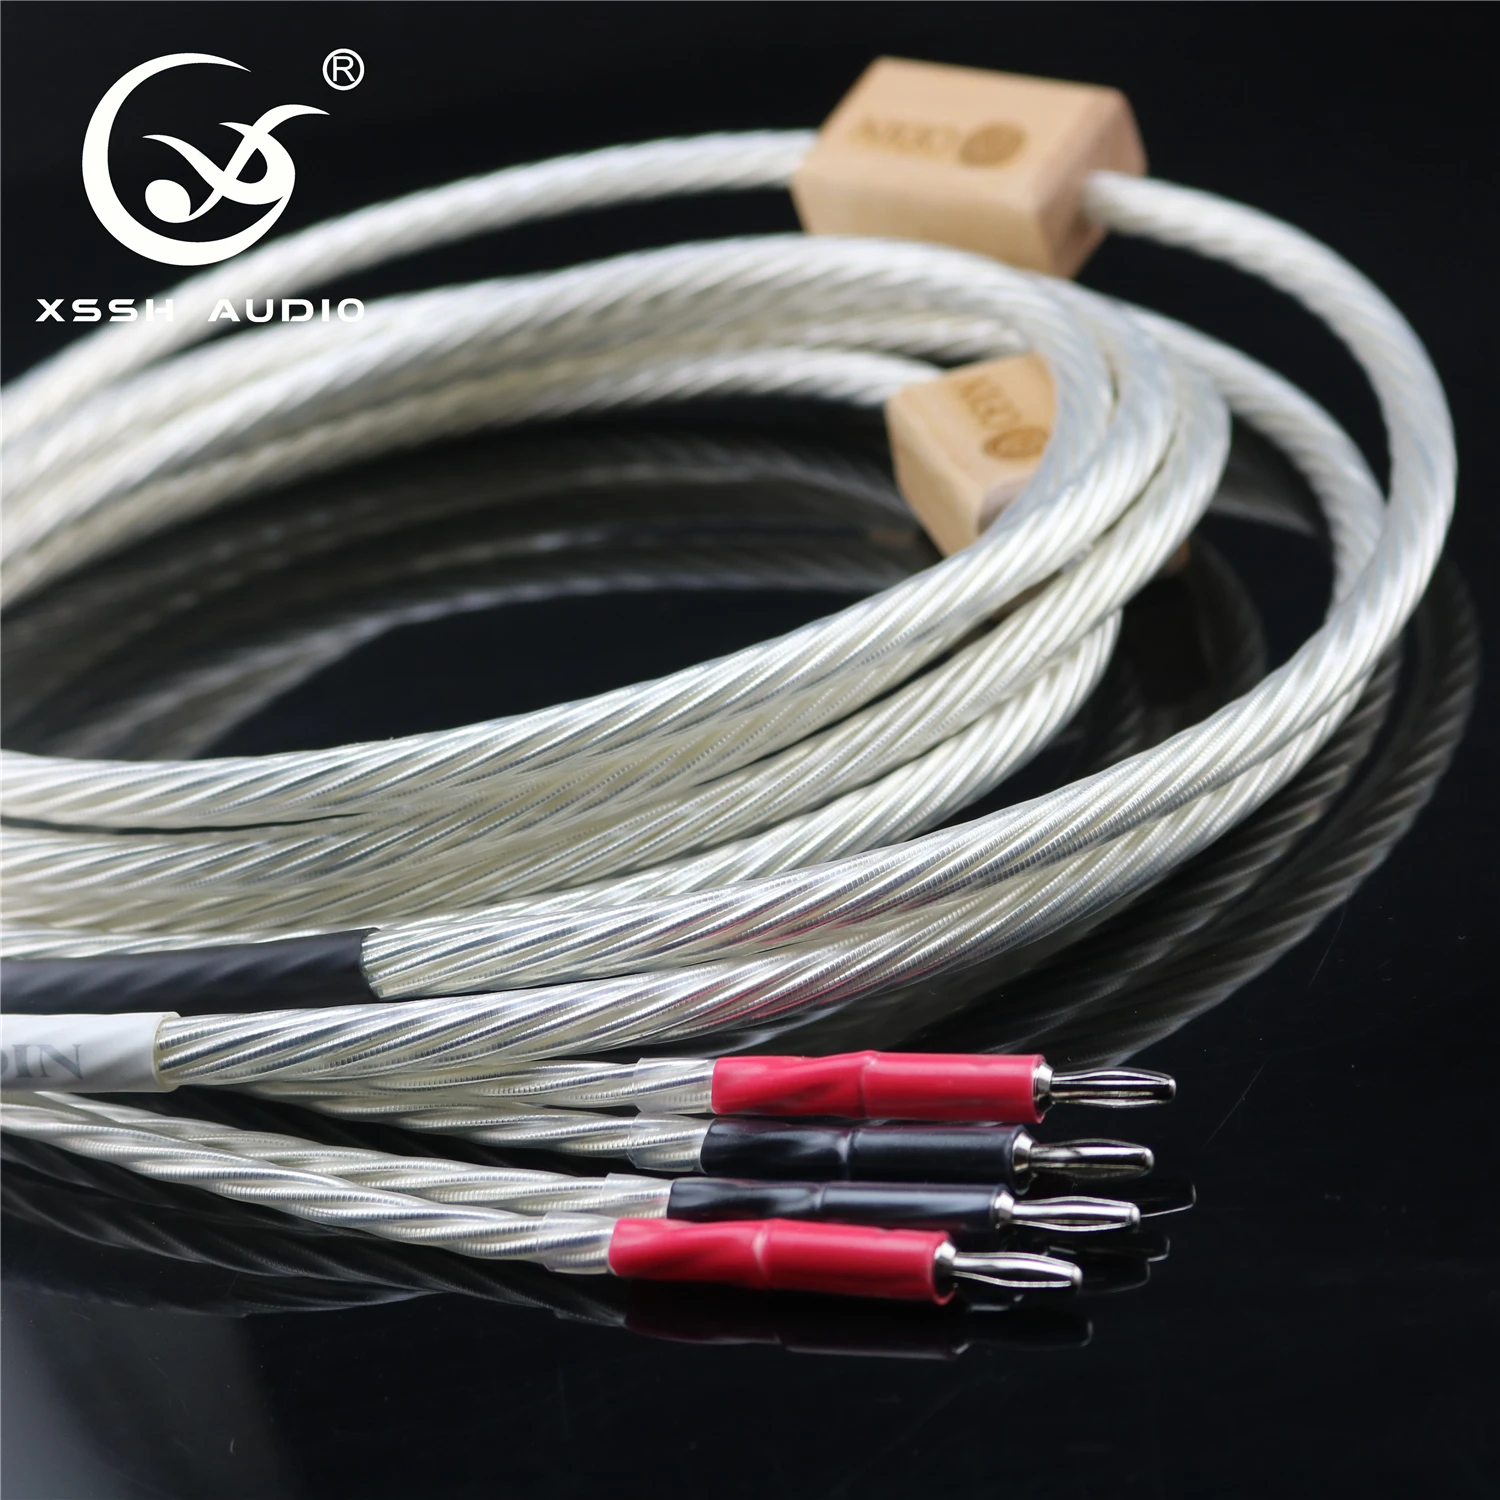 

YIVO GUANGZHOU Wholesales ODIN Silver Hifi Speaker Cable for Audio and Video With 24K Gold Plated Banana Plugs, As picture show